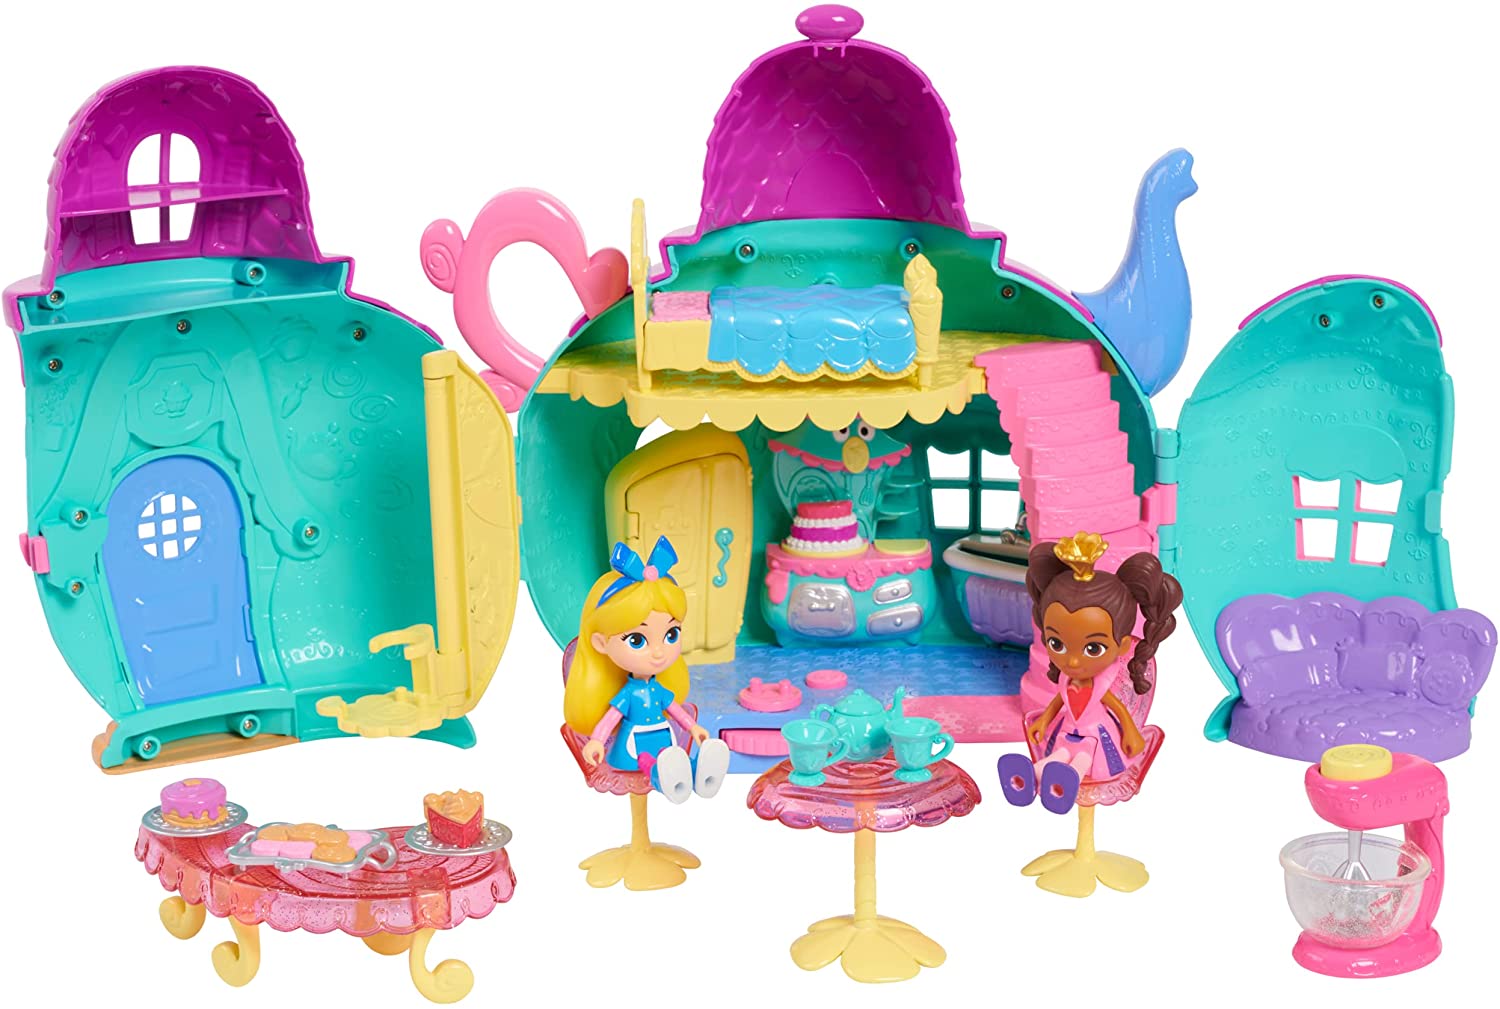 Disney Junior Alice’s Wonderland Bakery 10 Inch Alice & Magical Oven  Playset with Doll and Accessories, Officially Licensed Kids Toys for Ages 3  Up